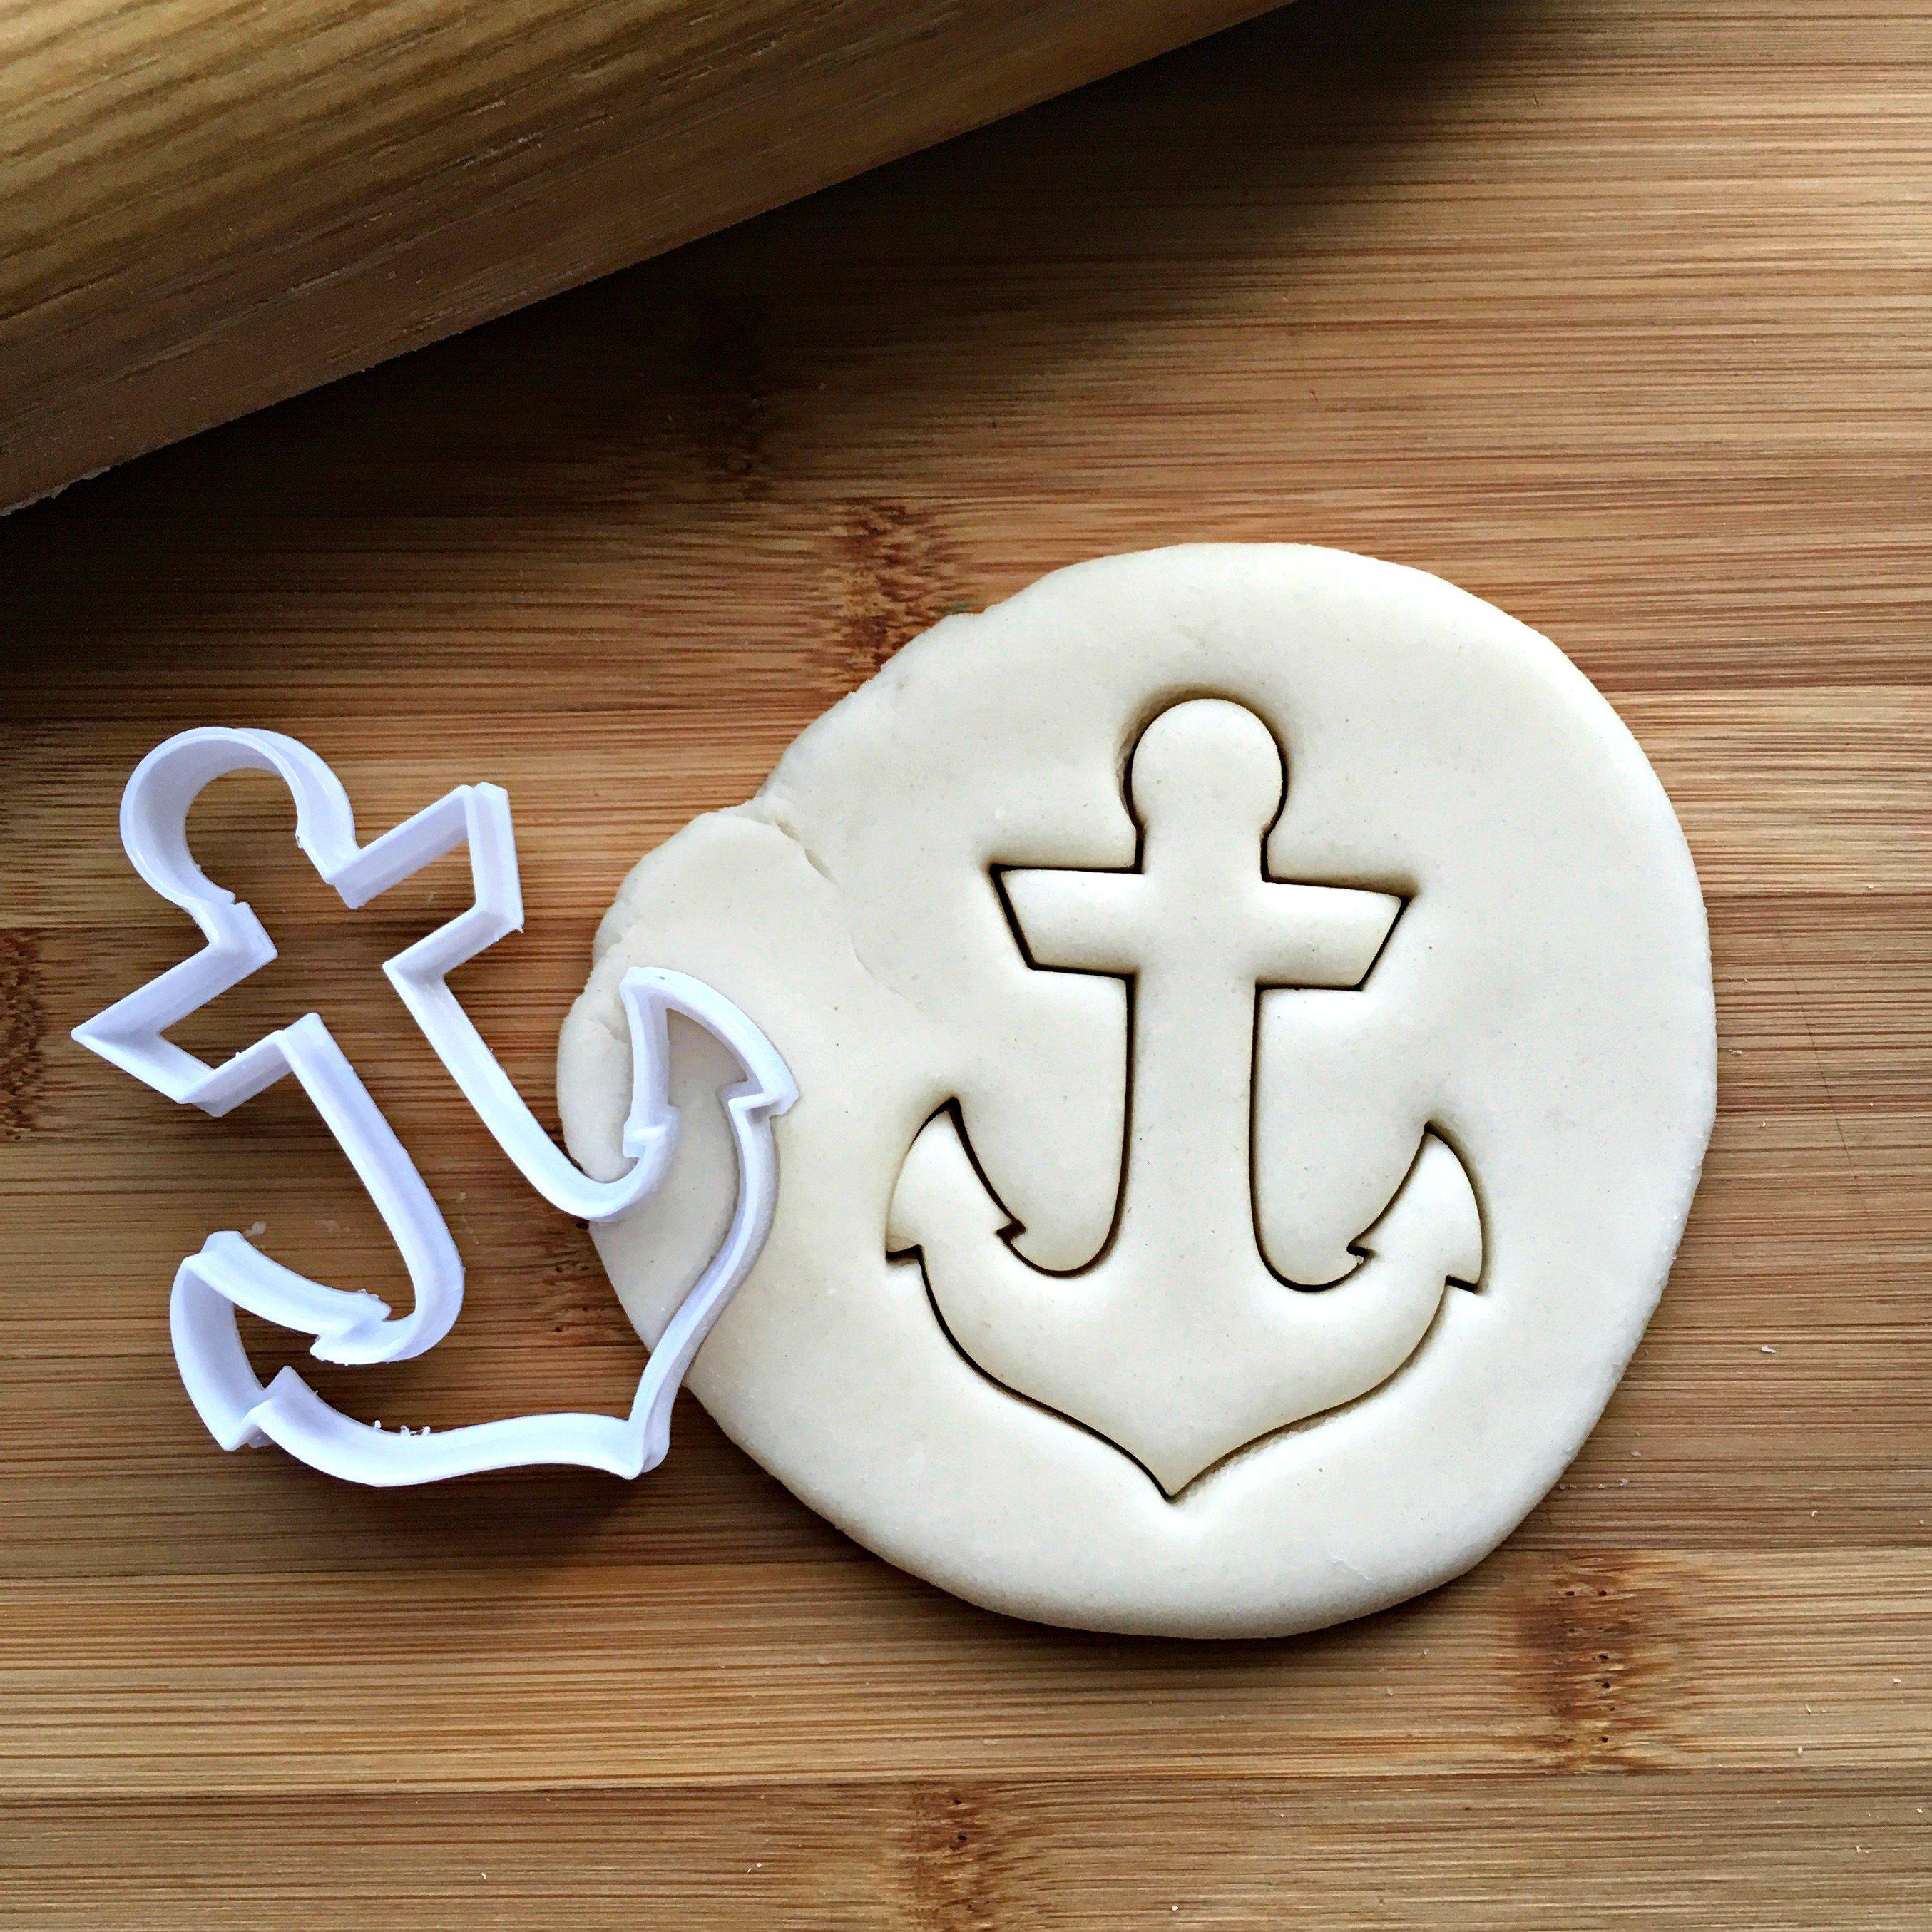 Anchor Cookie Cutter/Dishwasher Safe - Sweet Prints Inc.